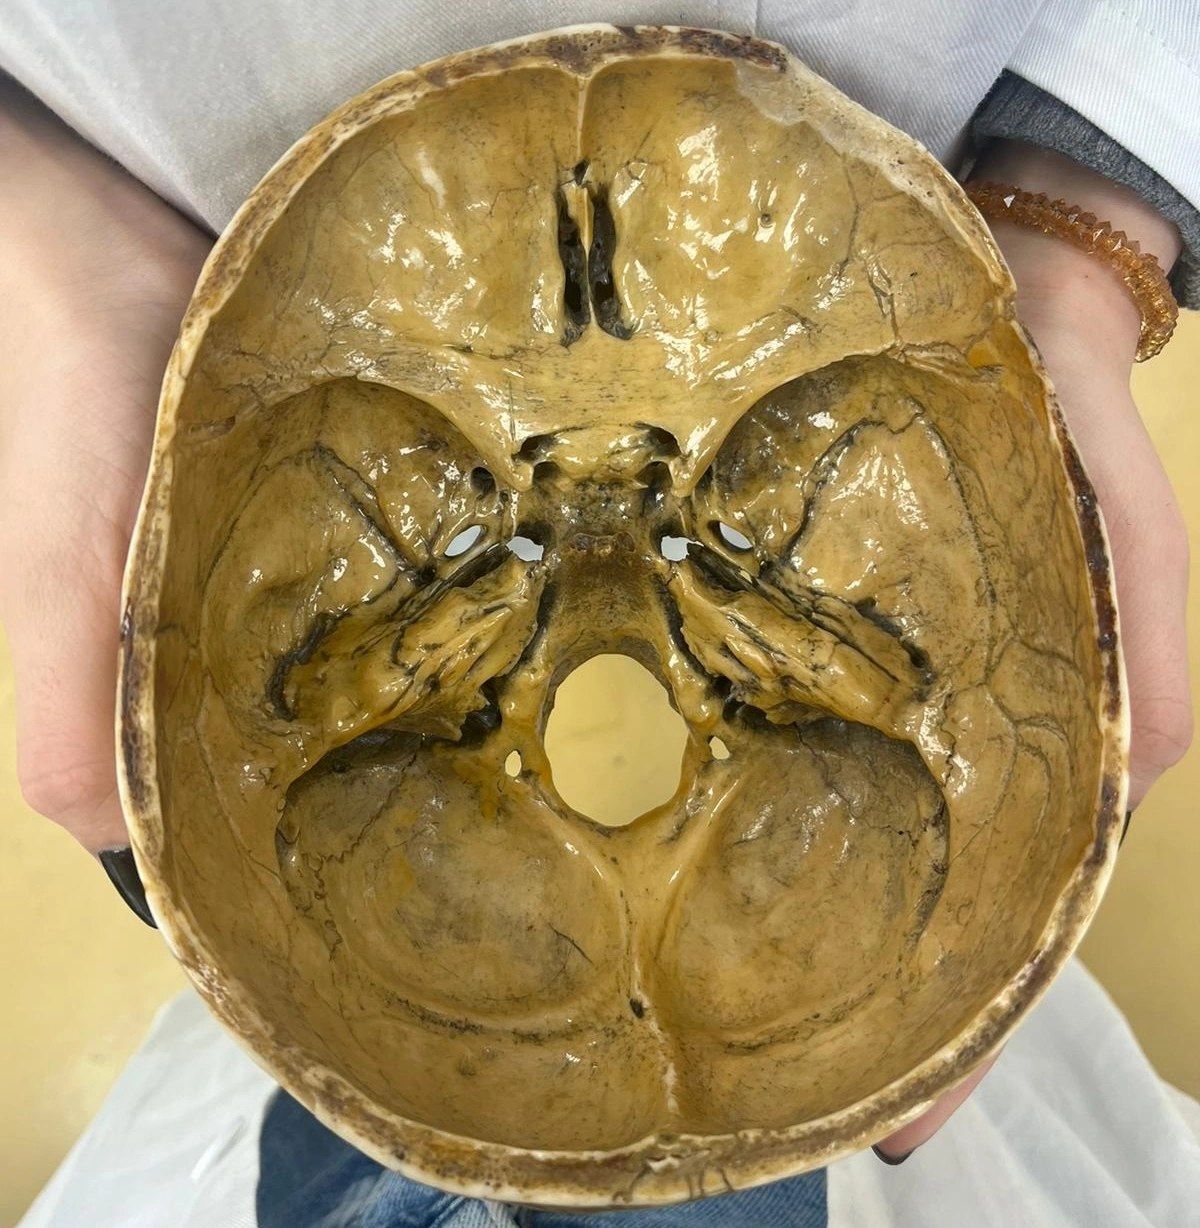 Base of the Skull - Superior view